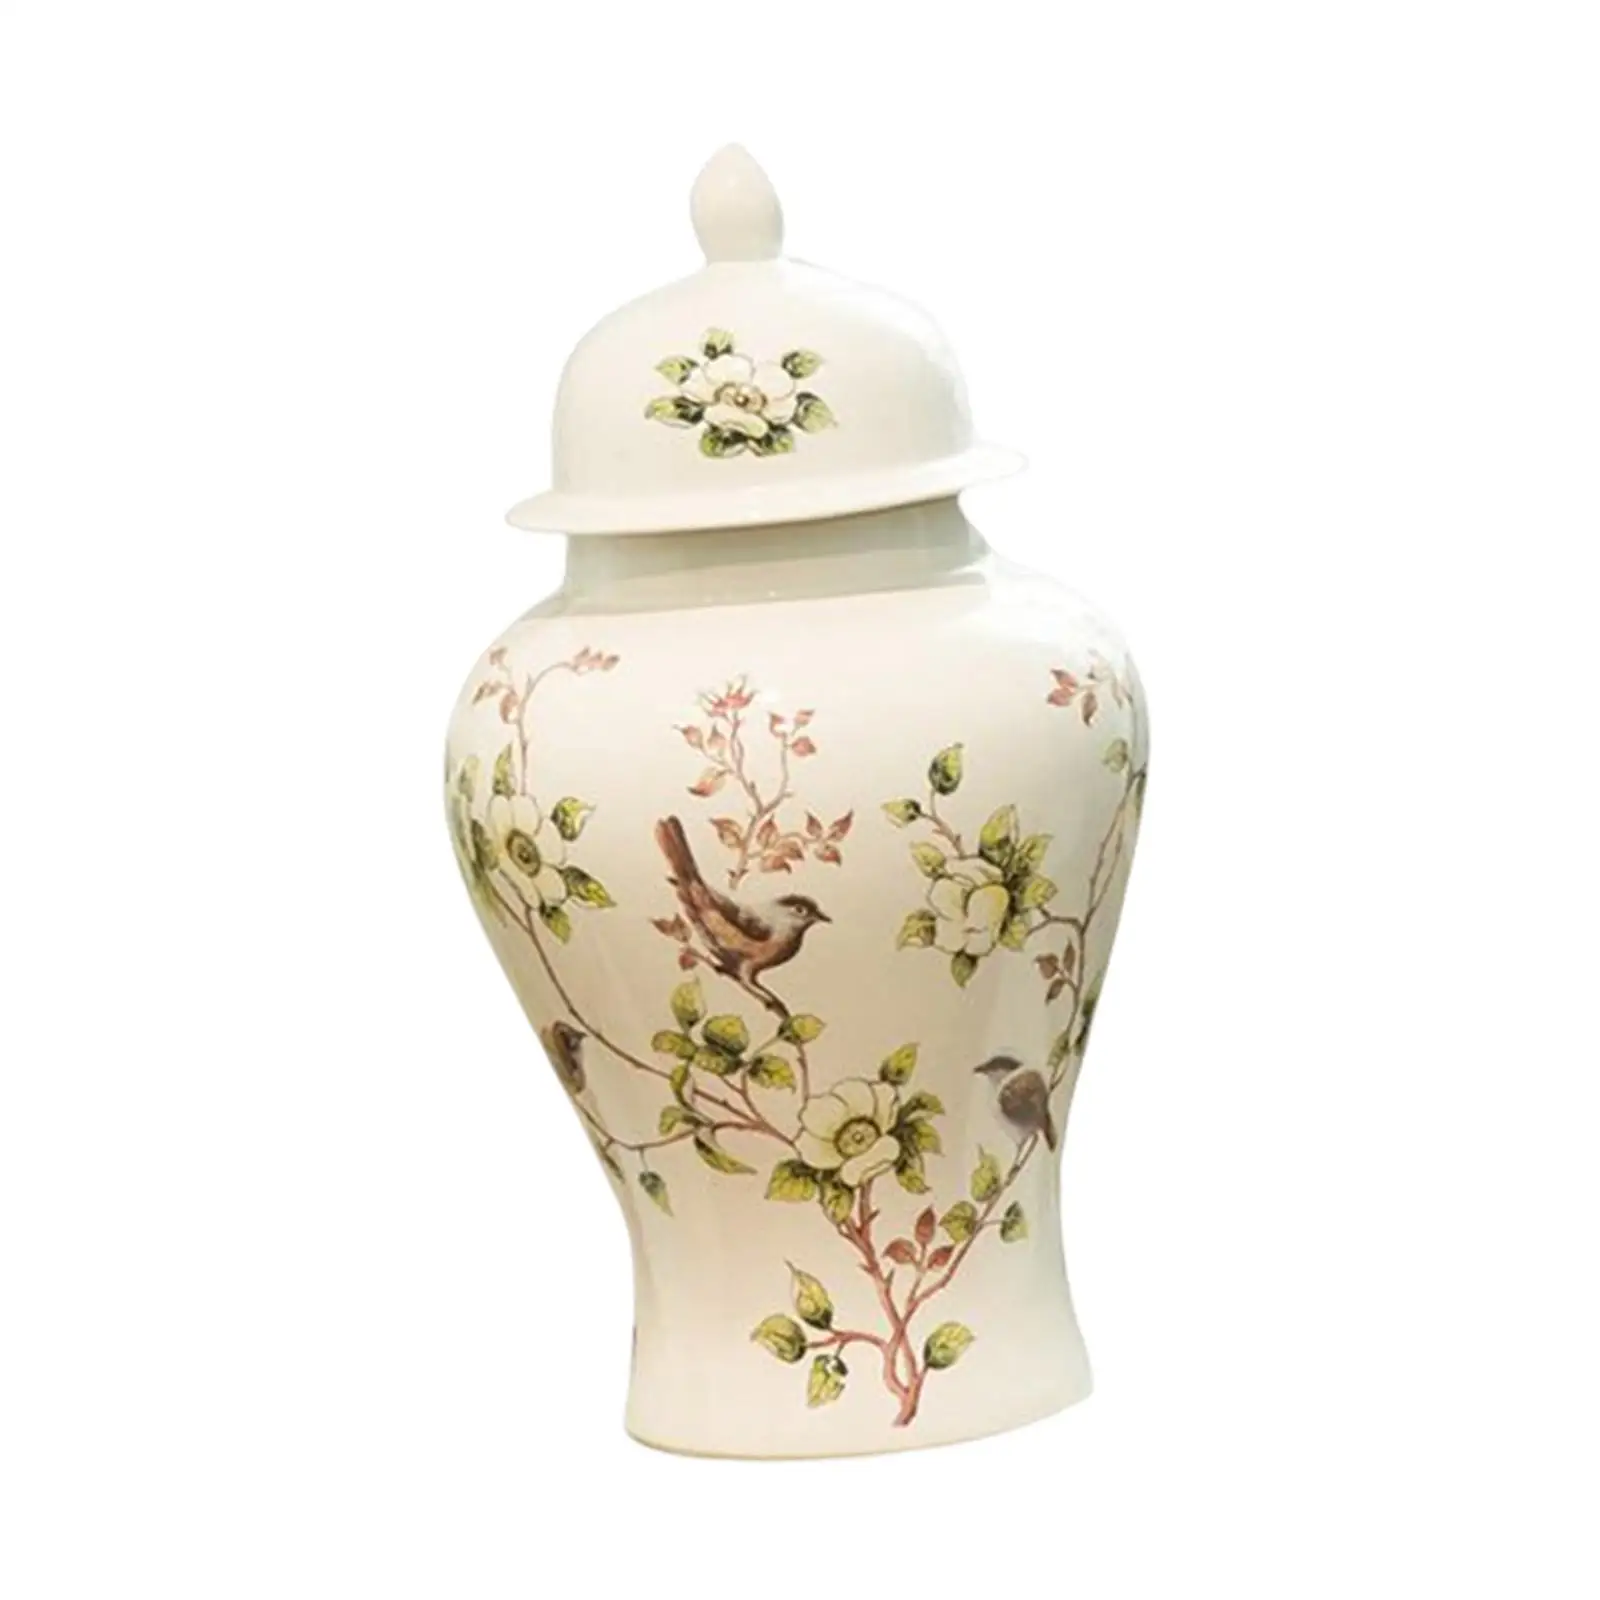 Porcelain Temple Jar Vase Decorative with Lid Tall Ornaments Ceramic Ginger Jar for Home Living Room Entryway Fireplace